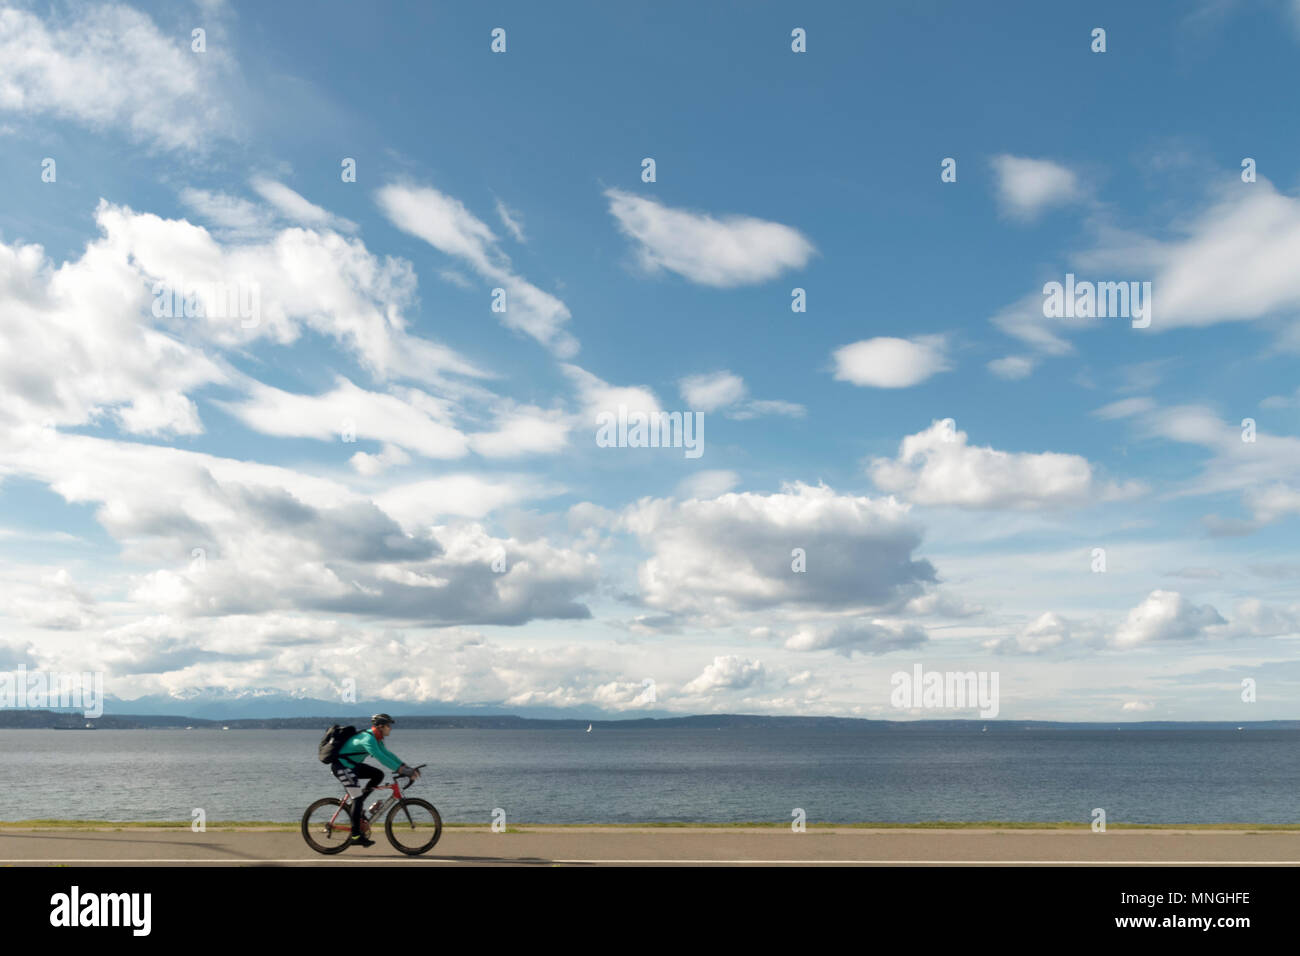 Man commuting on bicycle on a sunny afternoon next to Puget Sound near Seattle Washington. Stock Photo